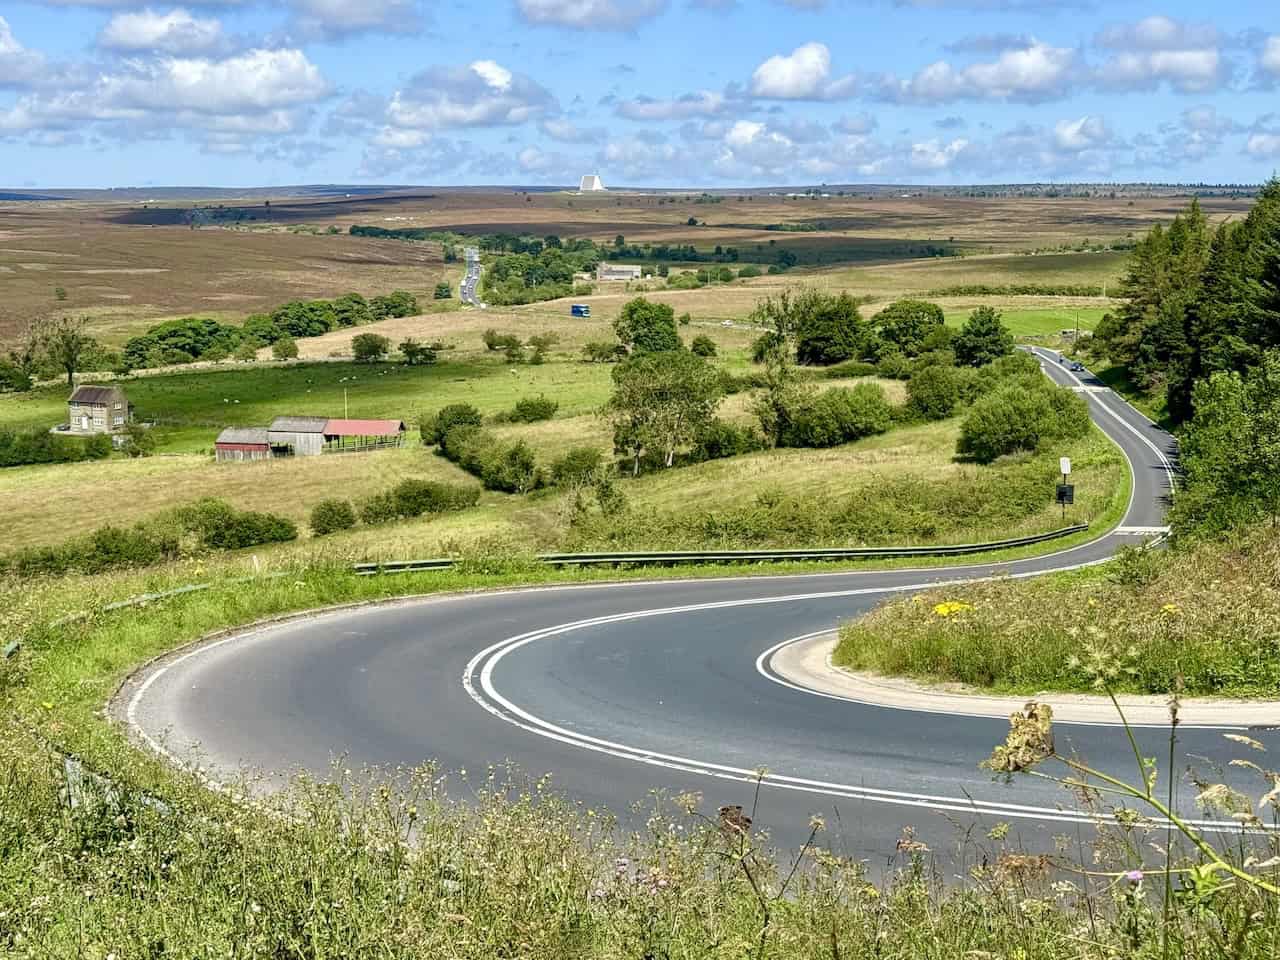 Overlooking the bend in the road of the A169, with the pyramidal shape of the radar station at RAF Fylingdales visible on the horizon.